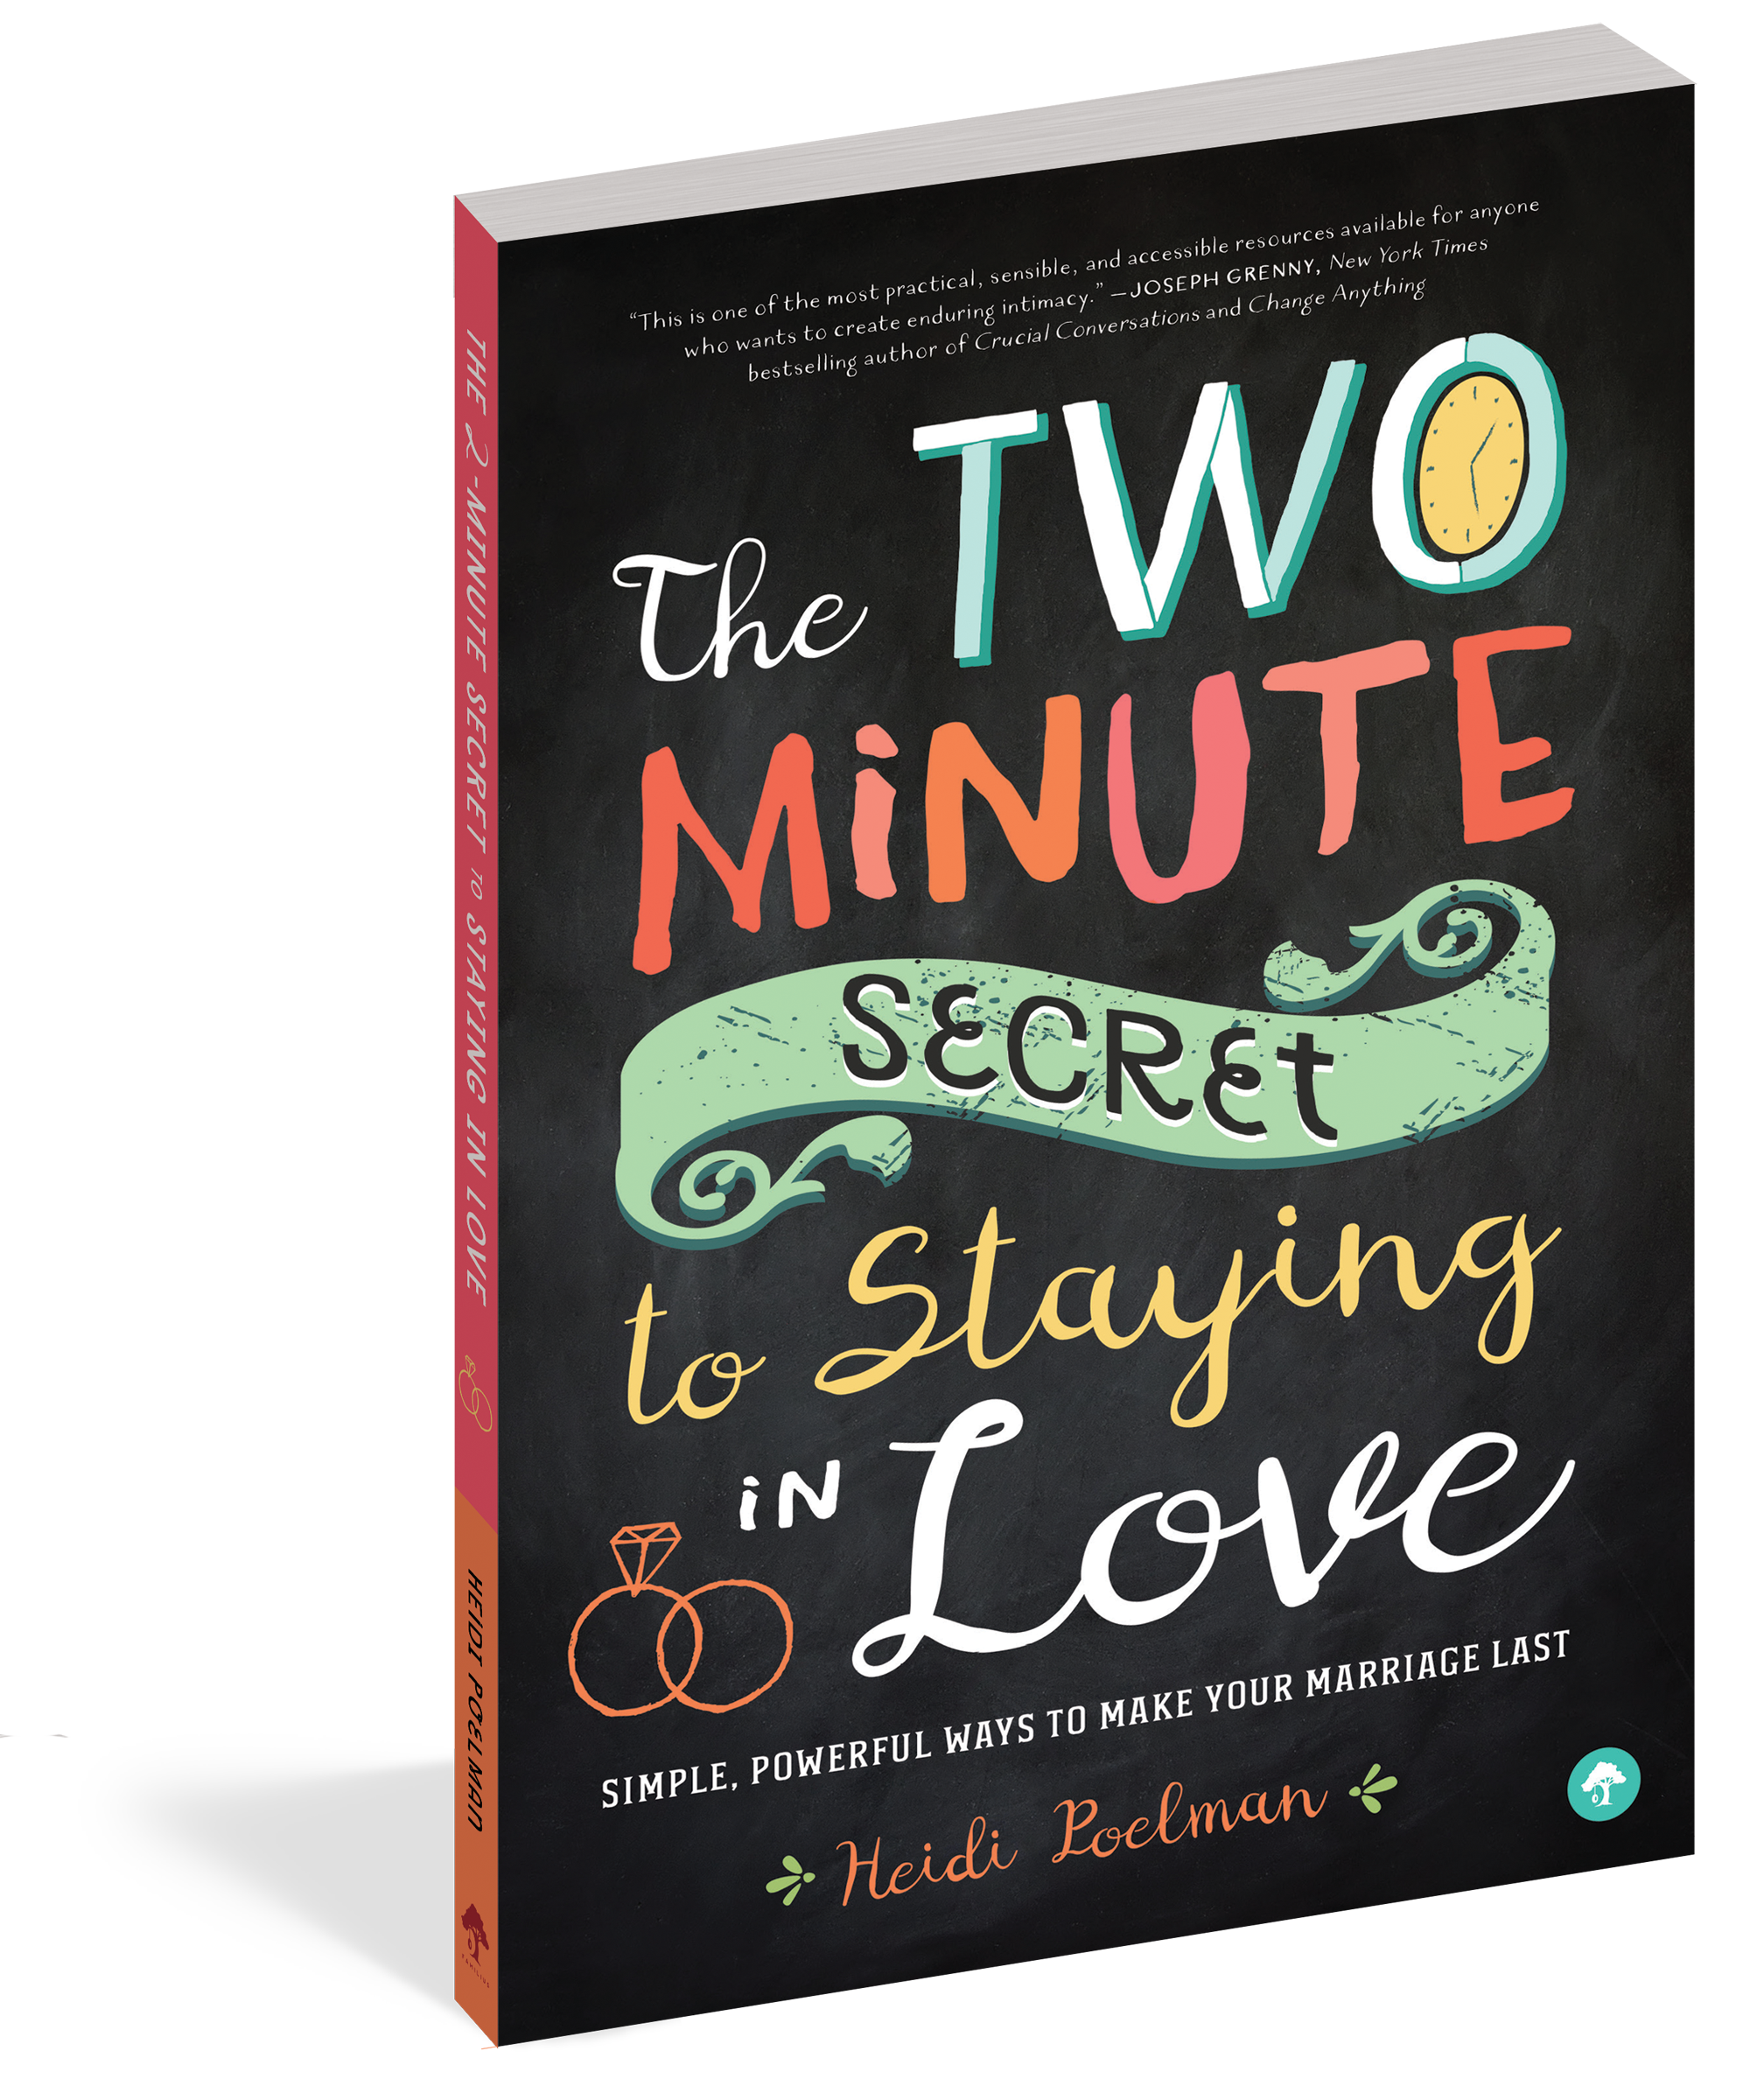 The cover of the book The Two-Minute Secret to Staying in Love.